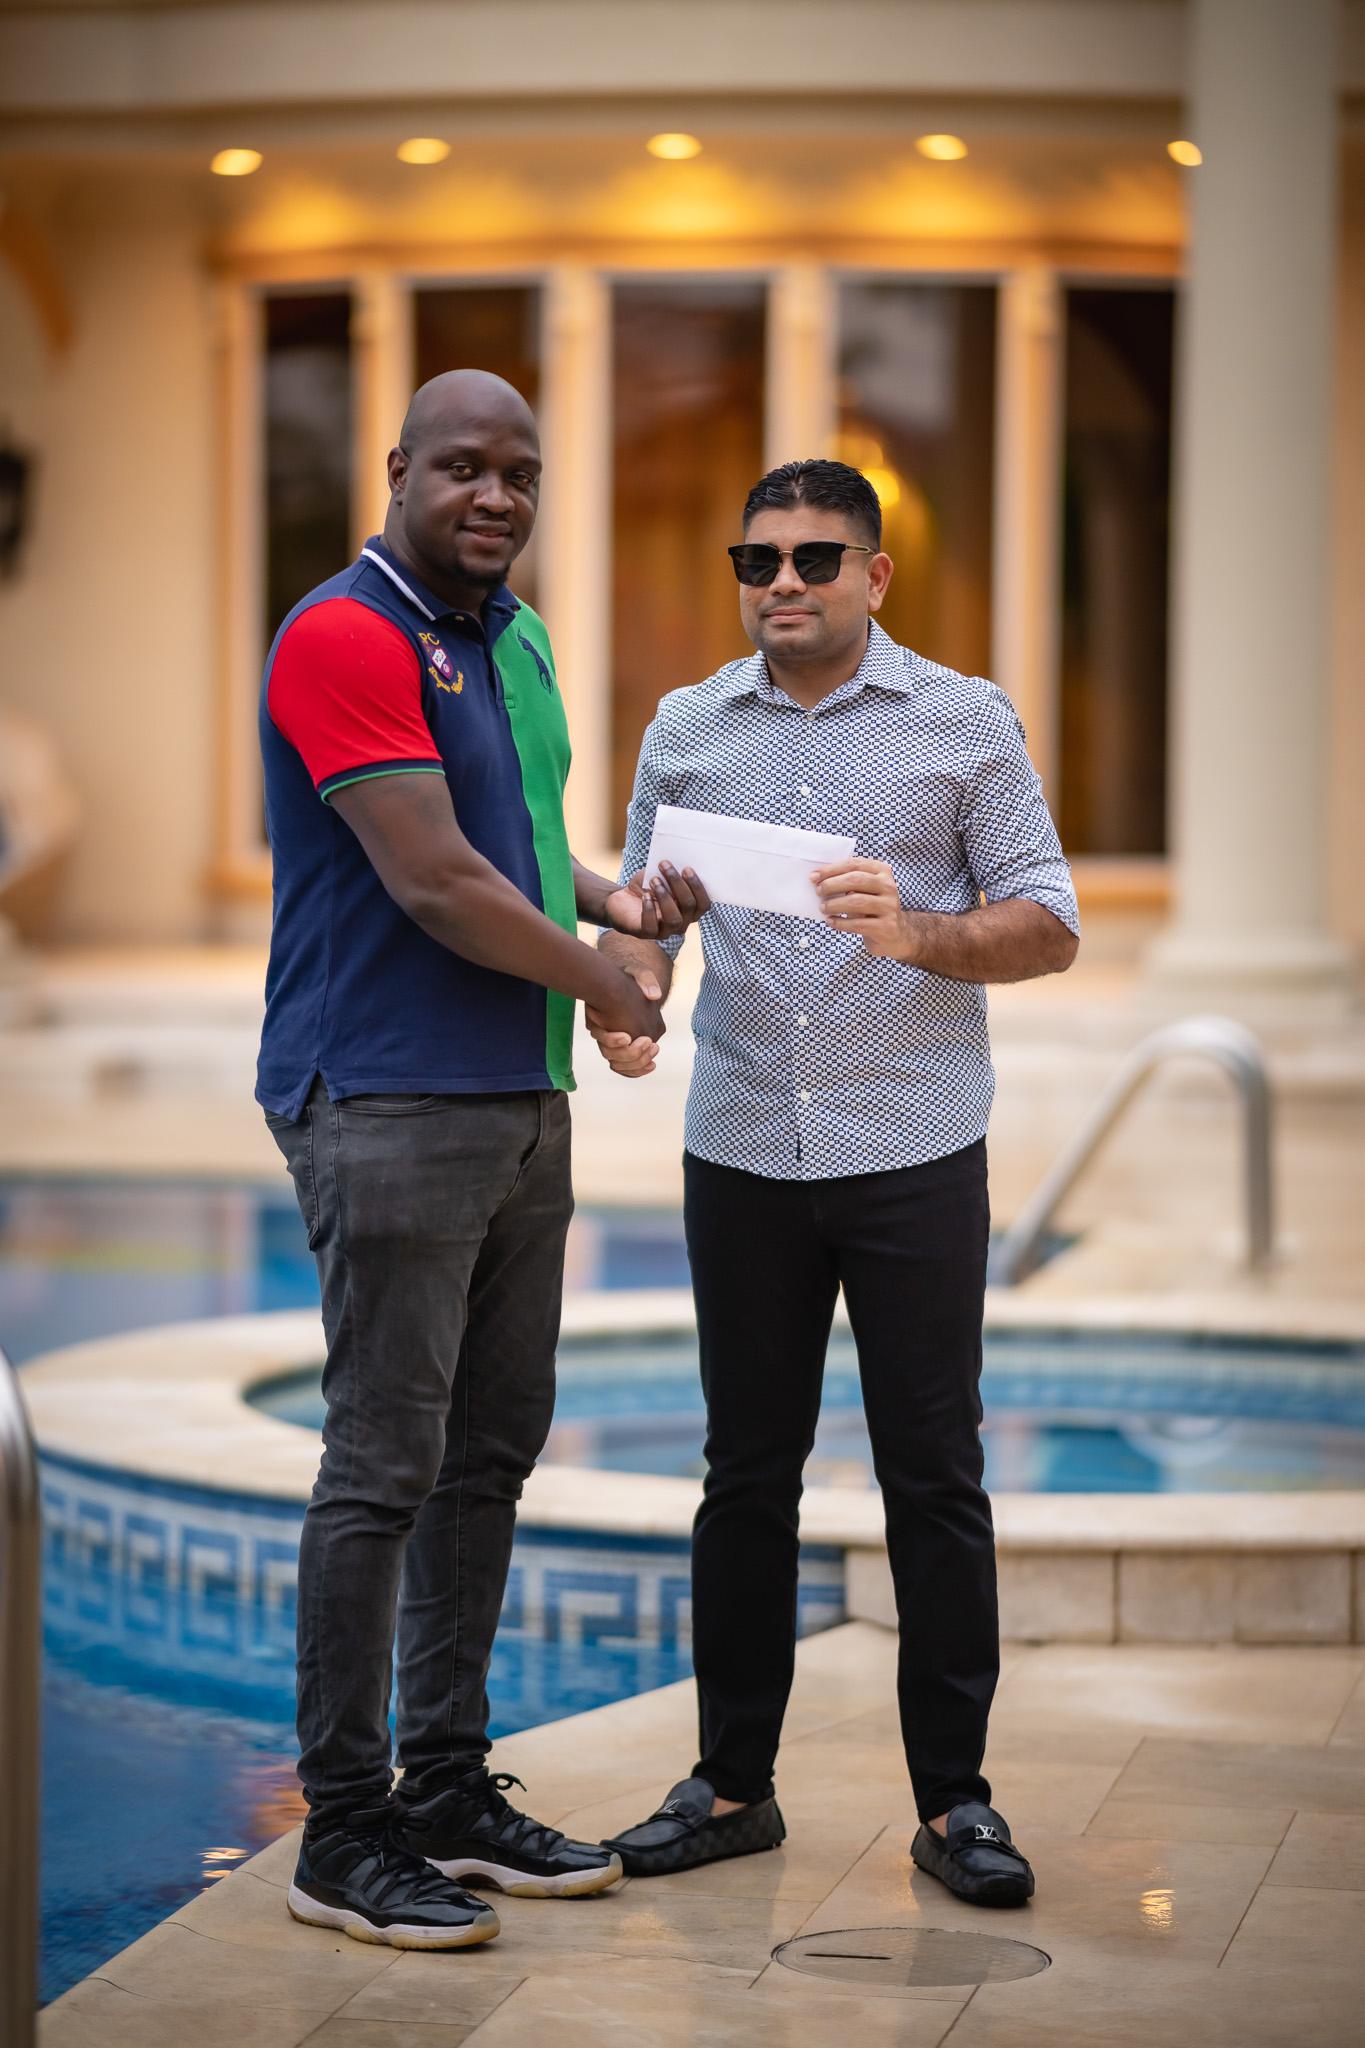 Team Mohamed’s principal, Azruddin Mohamed, presenting his entity’s support to 3x3 Classic to organiser Rawle Toney.